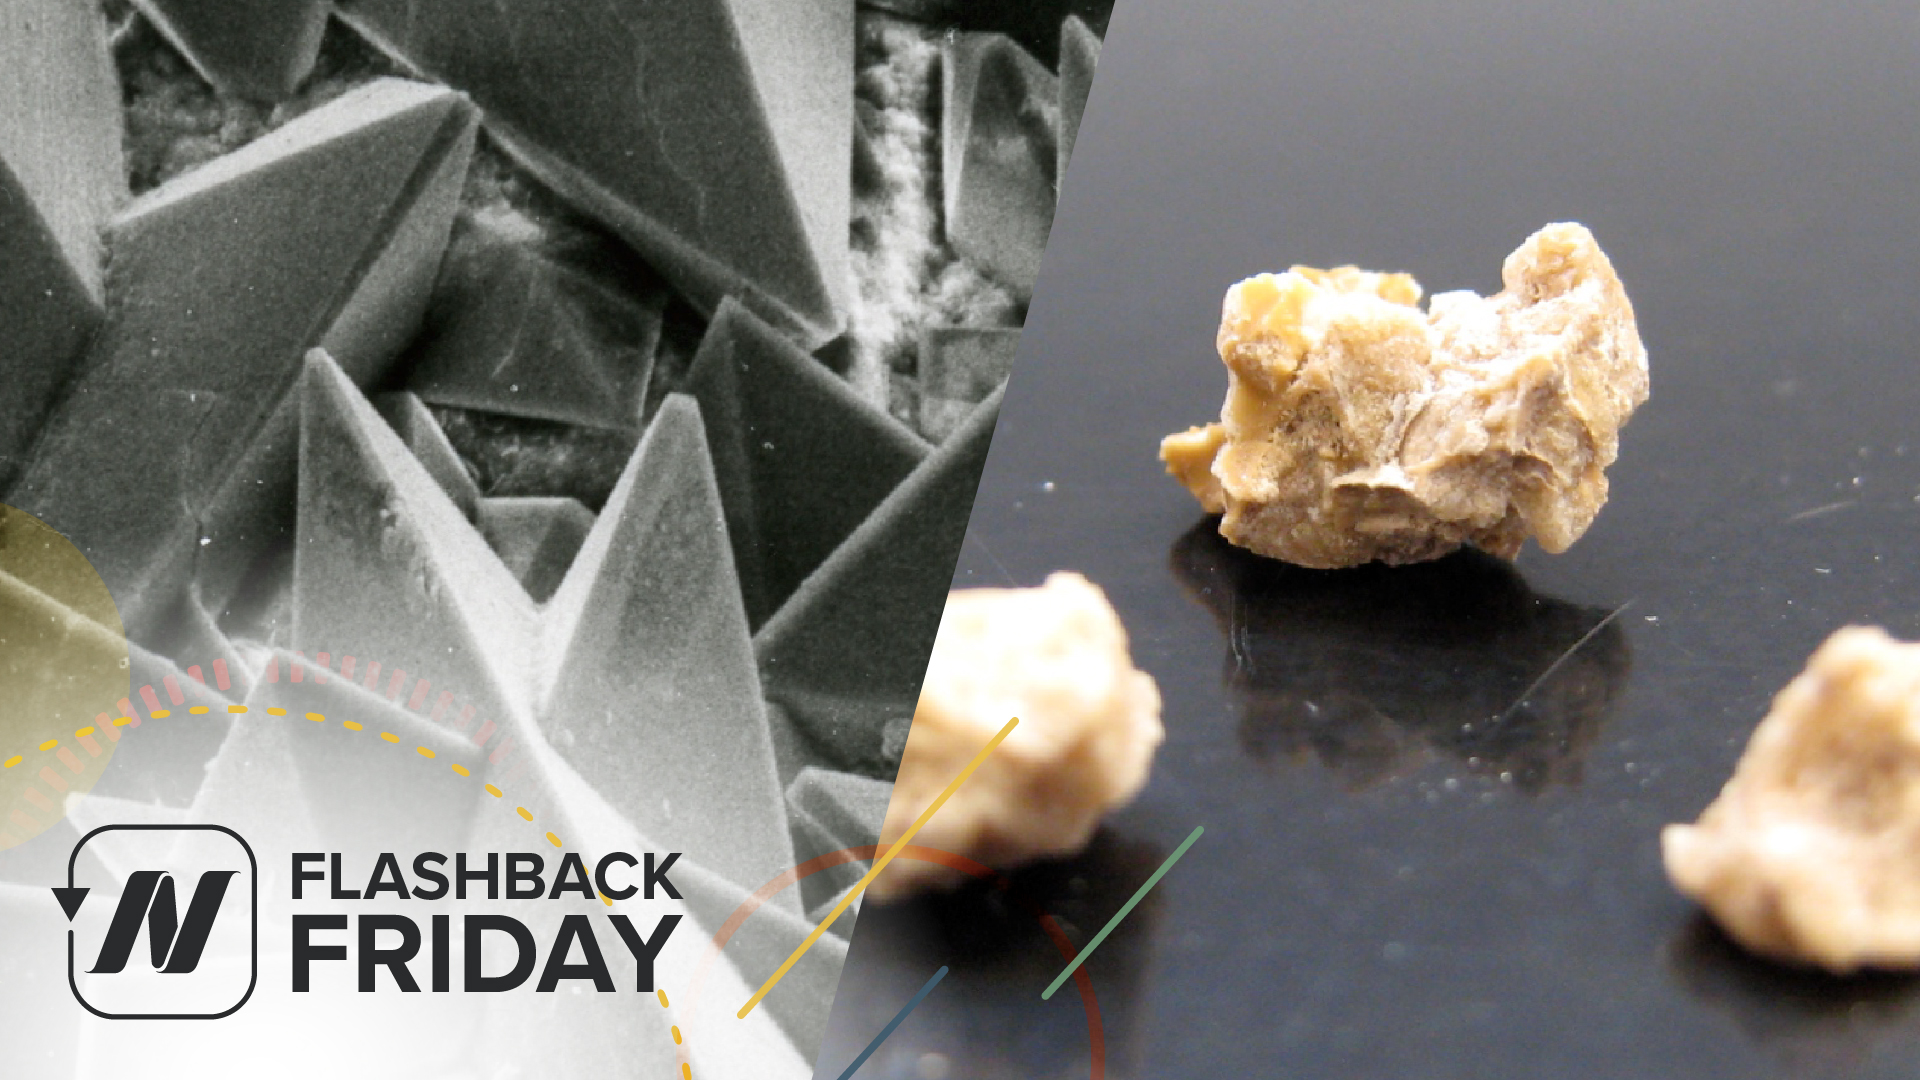 Flashback Friday: How to Prevent and Treat Kidney Stones with Diet